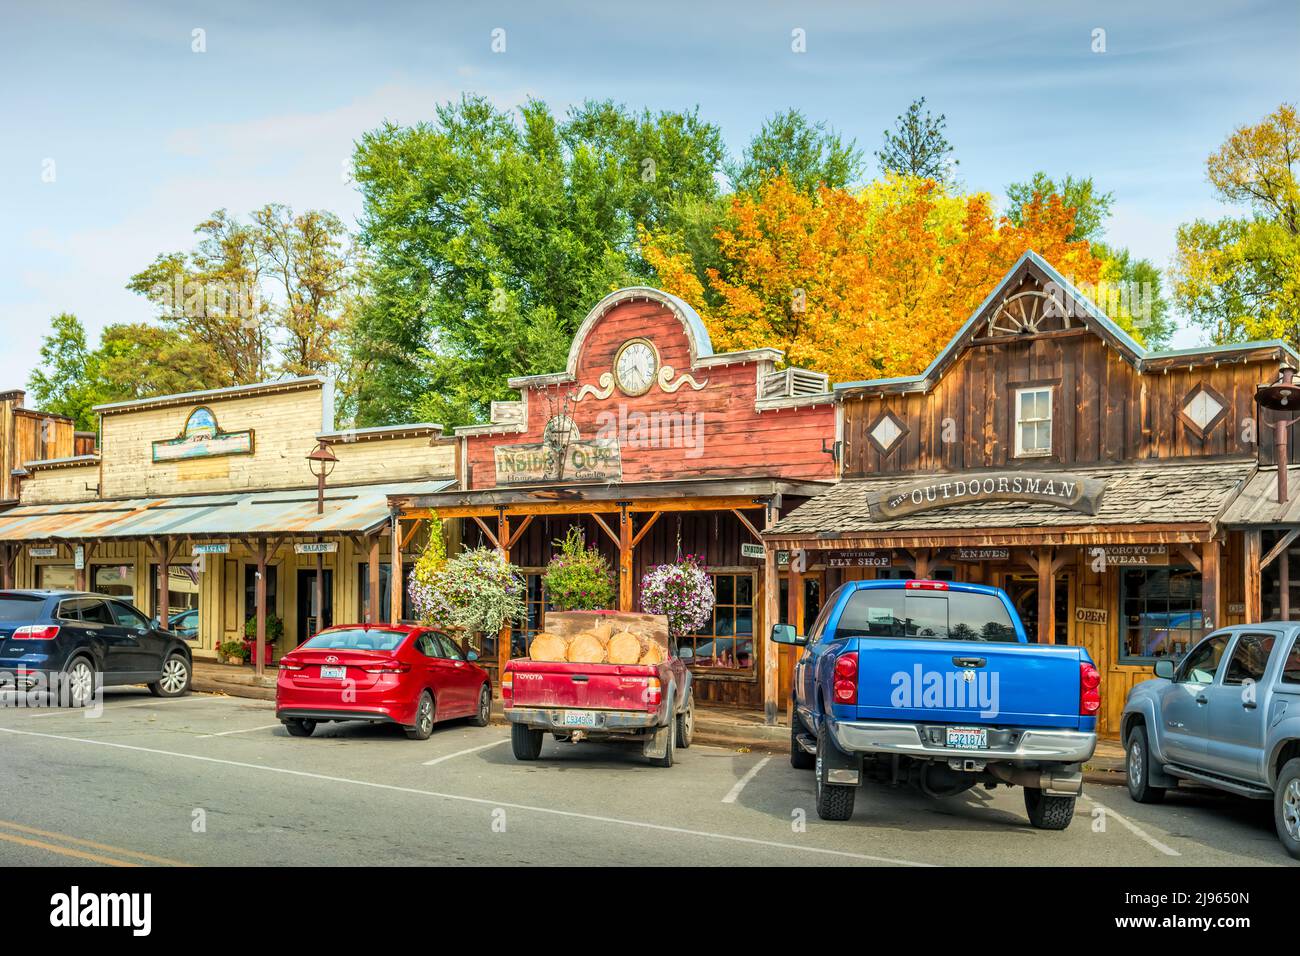 Western style stores in the town of Winthrop Washington State USA Stock Photo